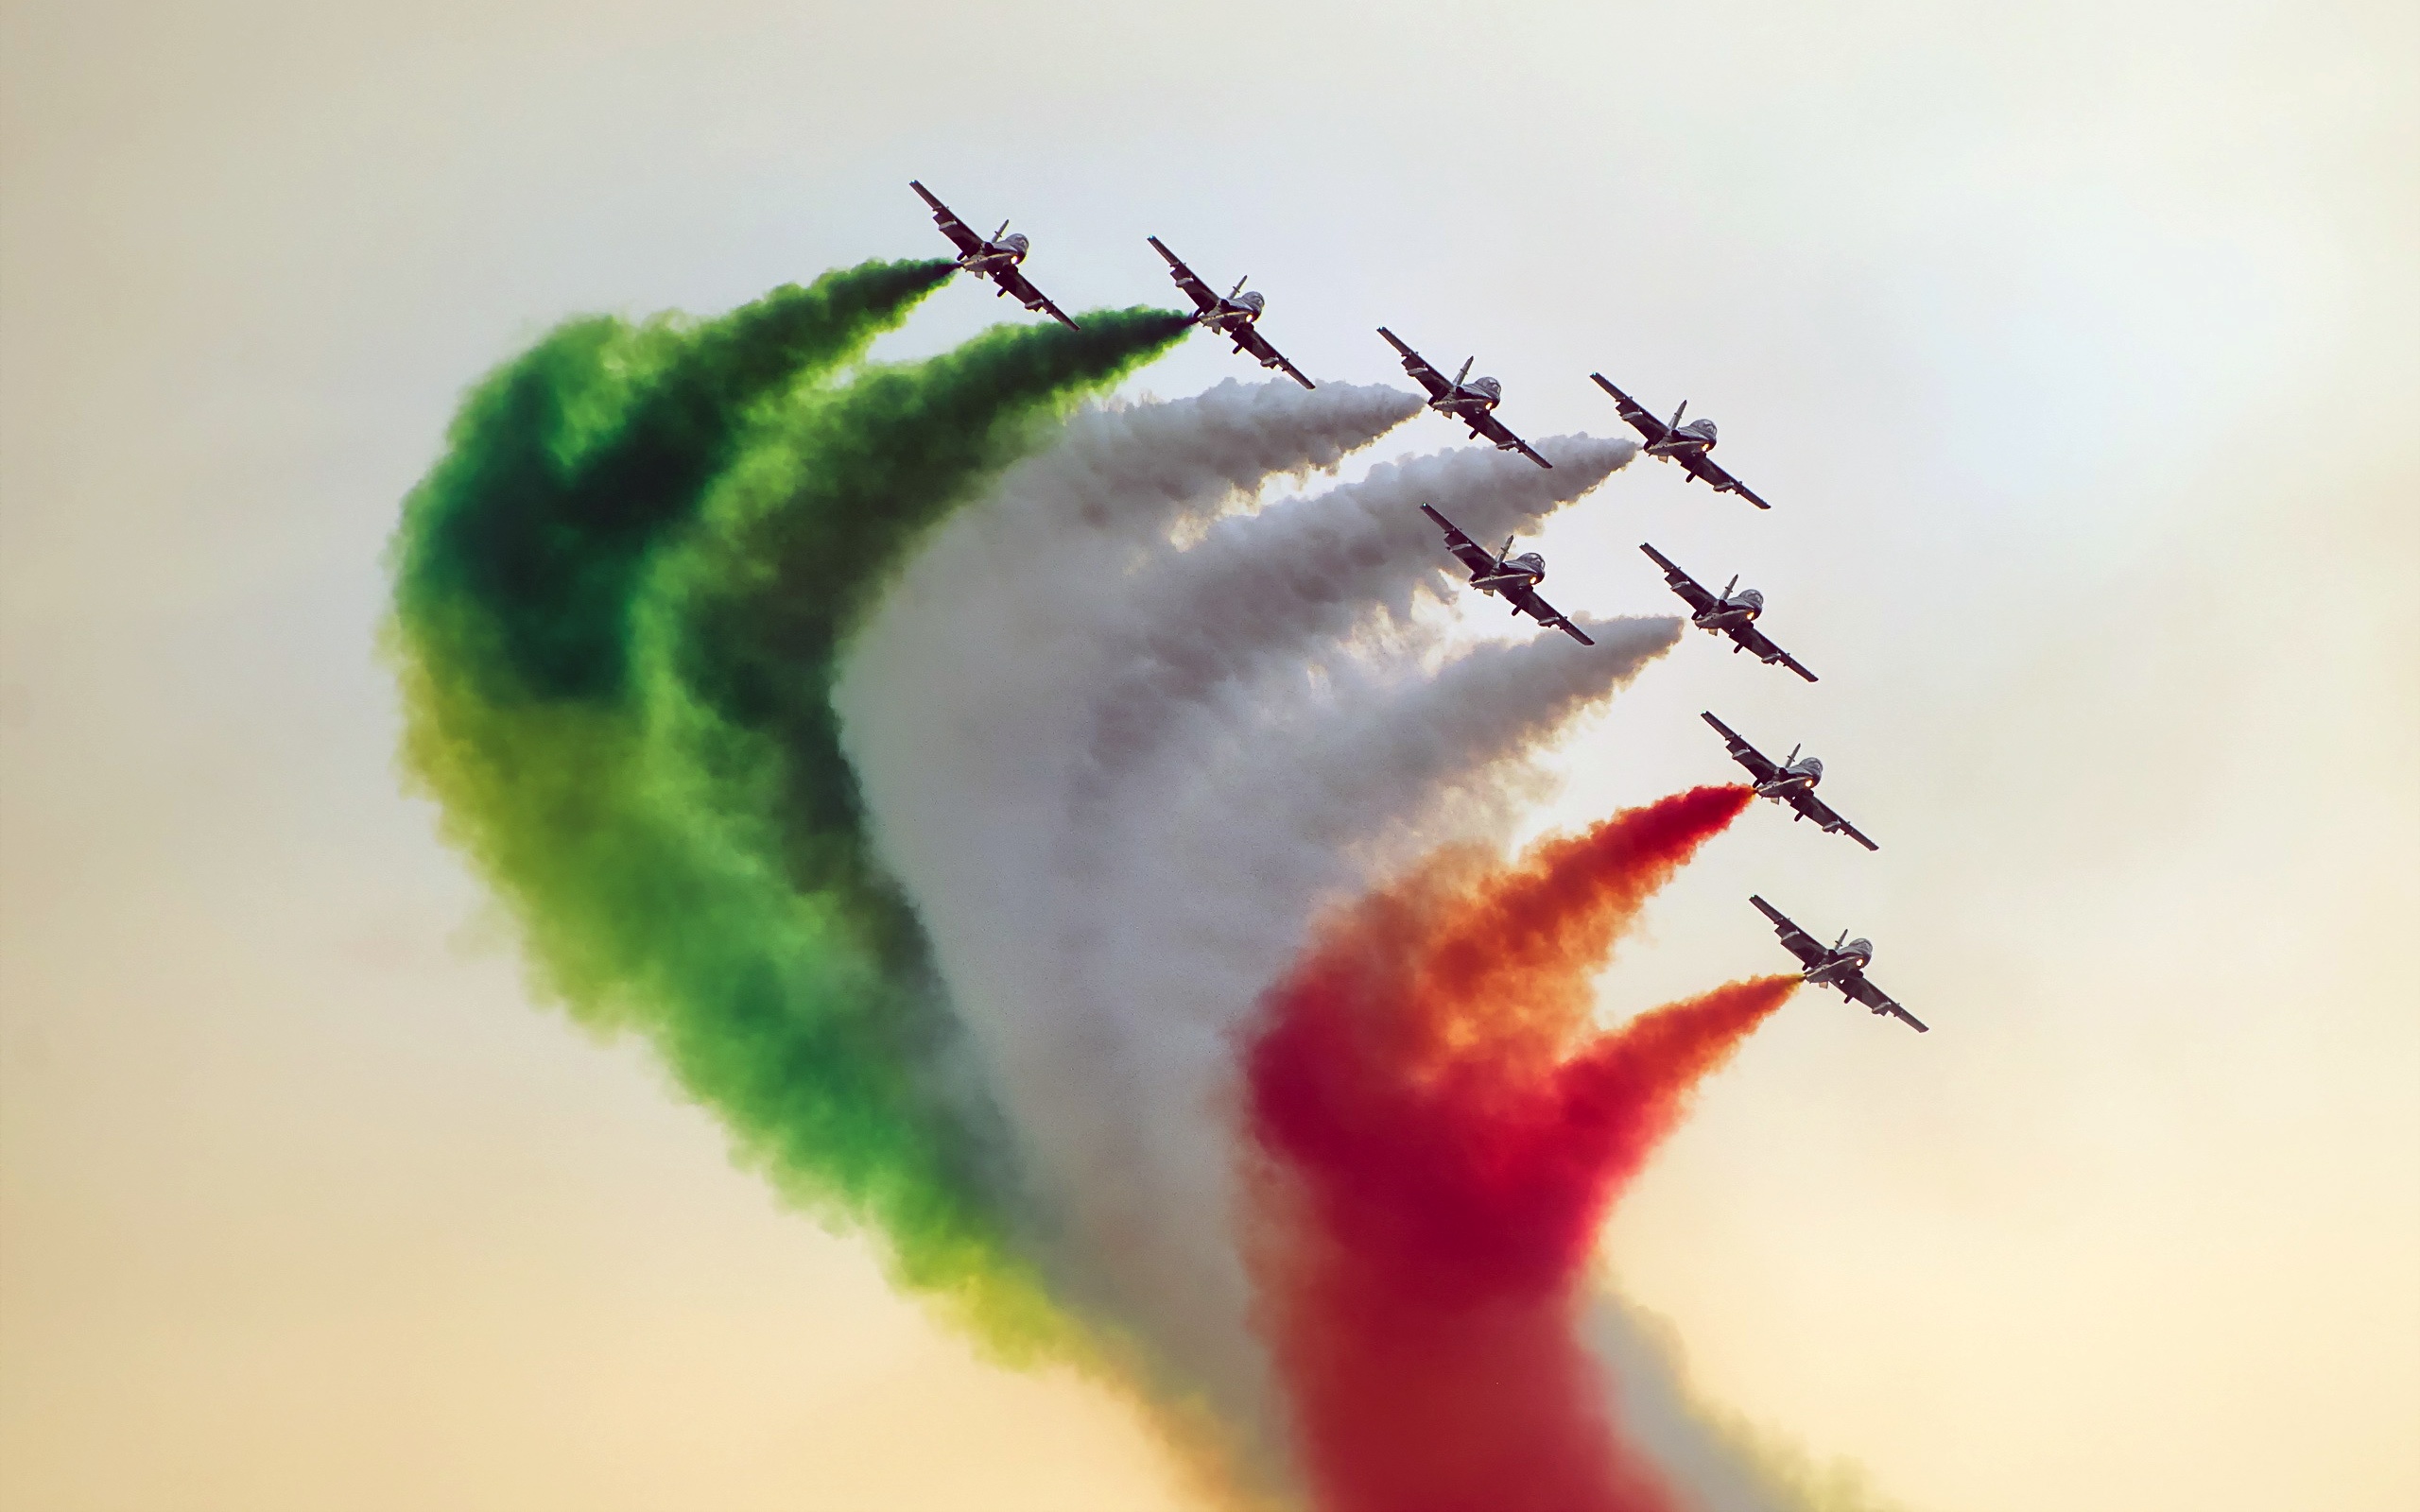 Indian Air Force Jet Fighters Wallpapers in jpg format for free